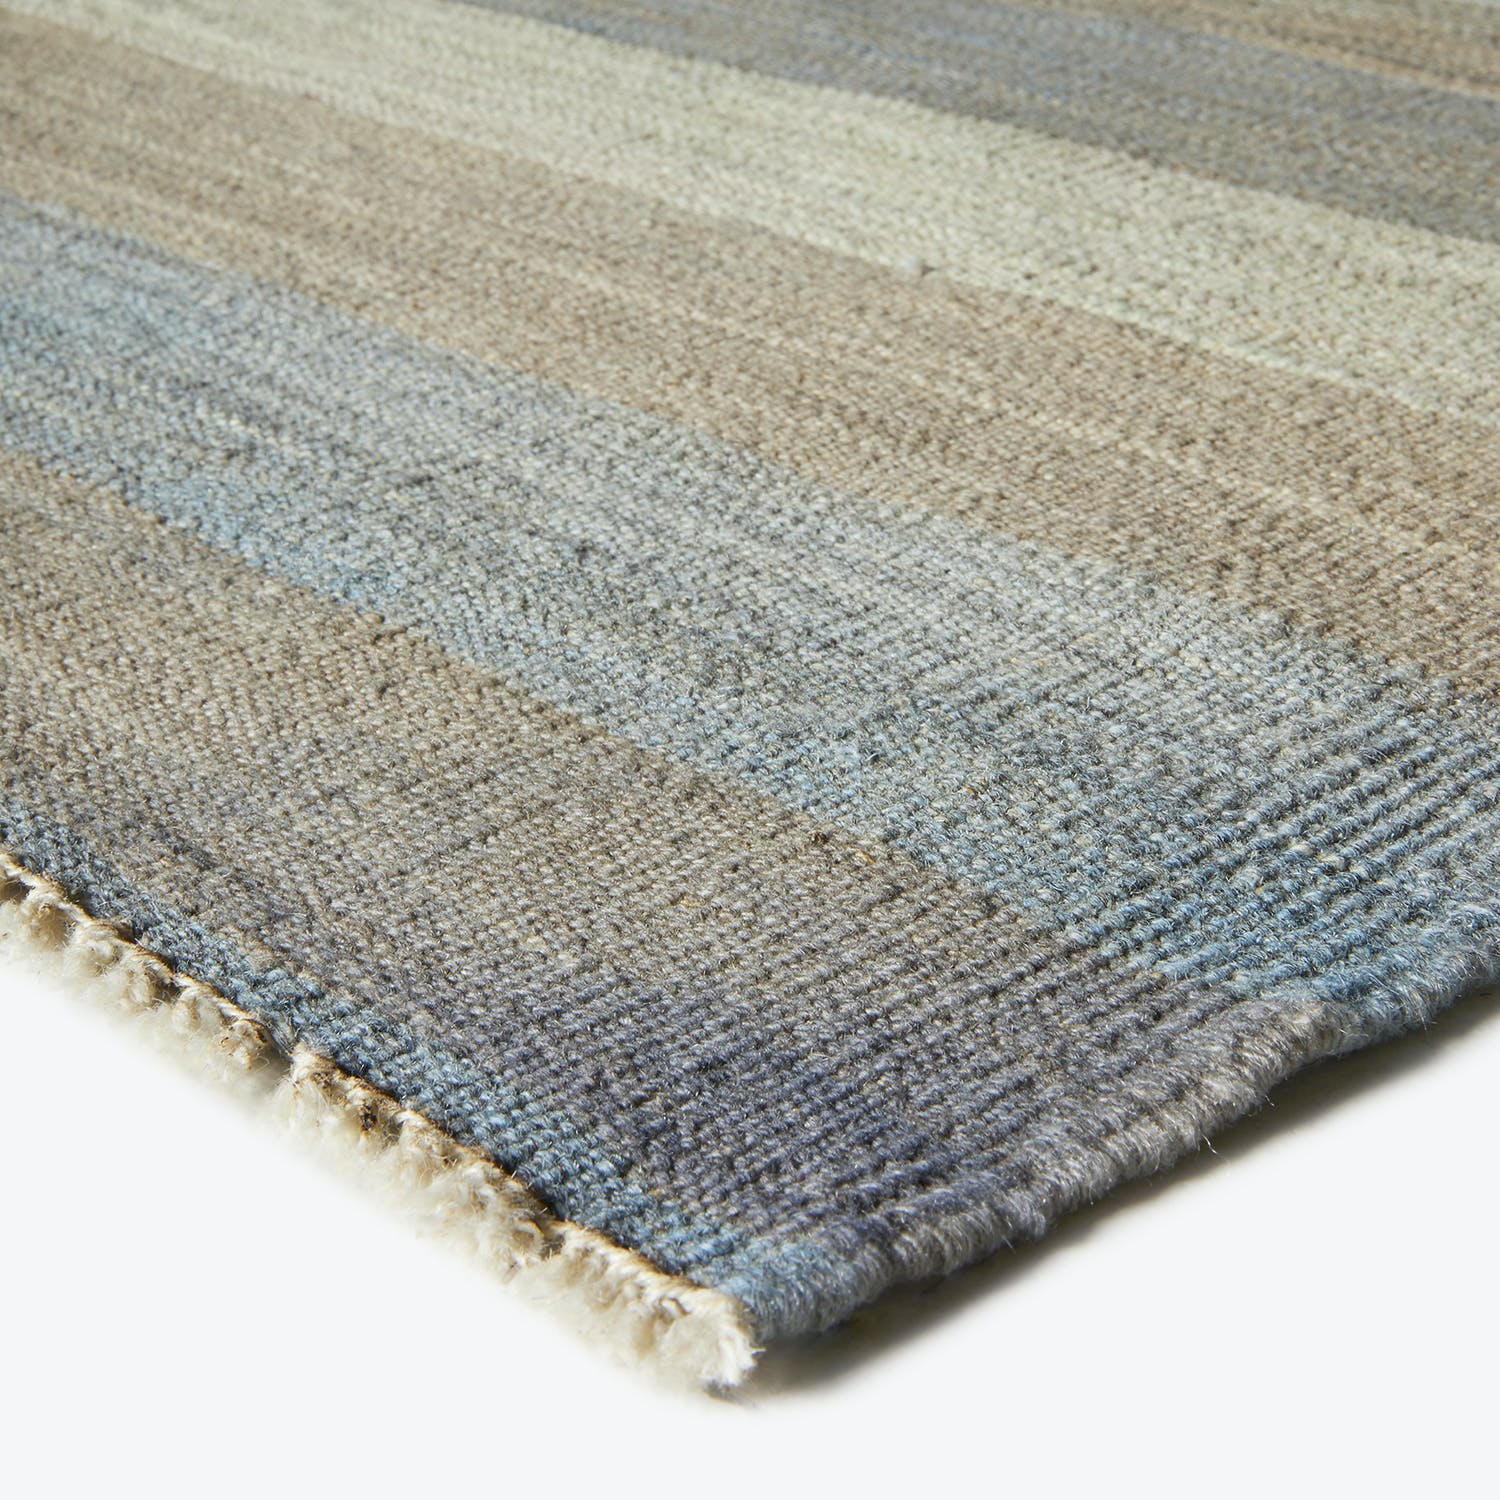 Close-up of a striped, textured rug with shades of blue.